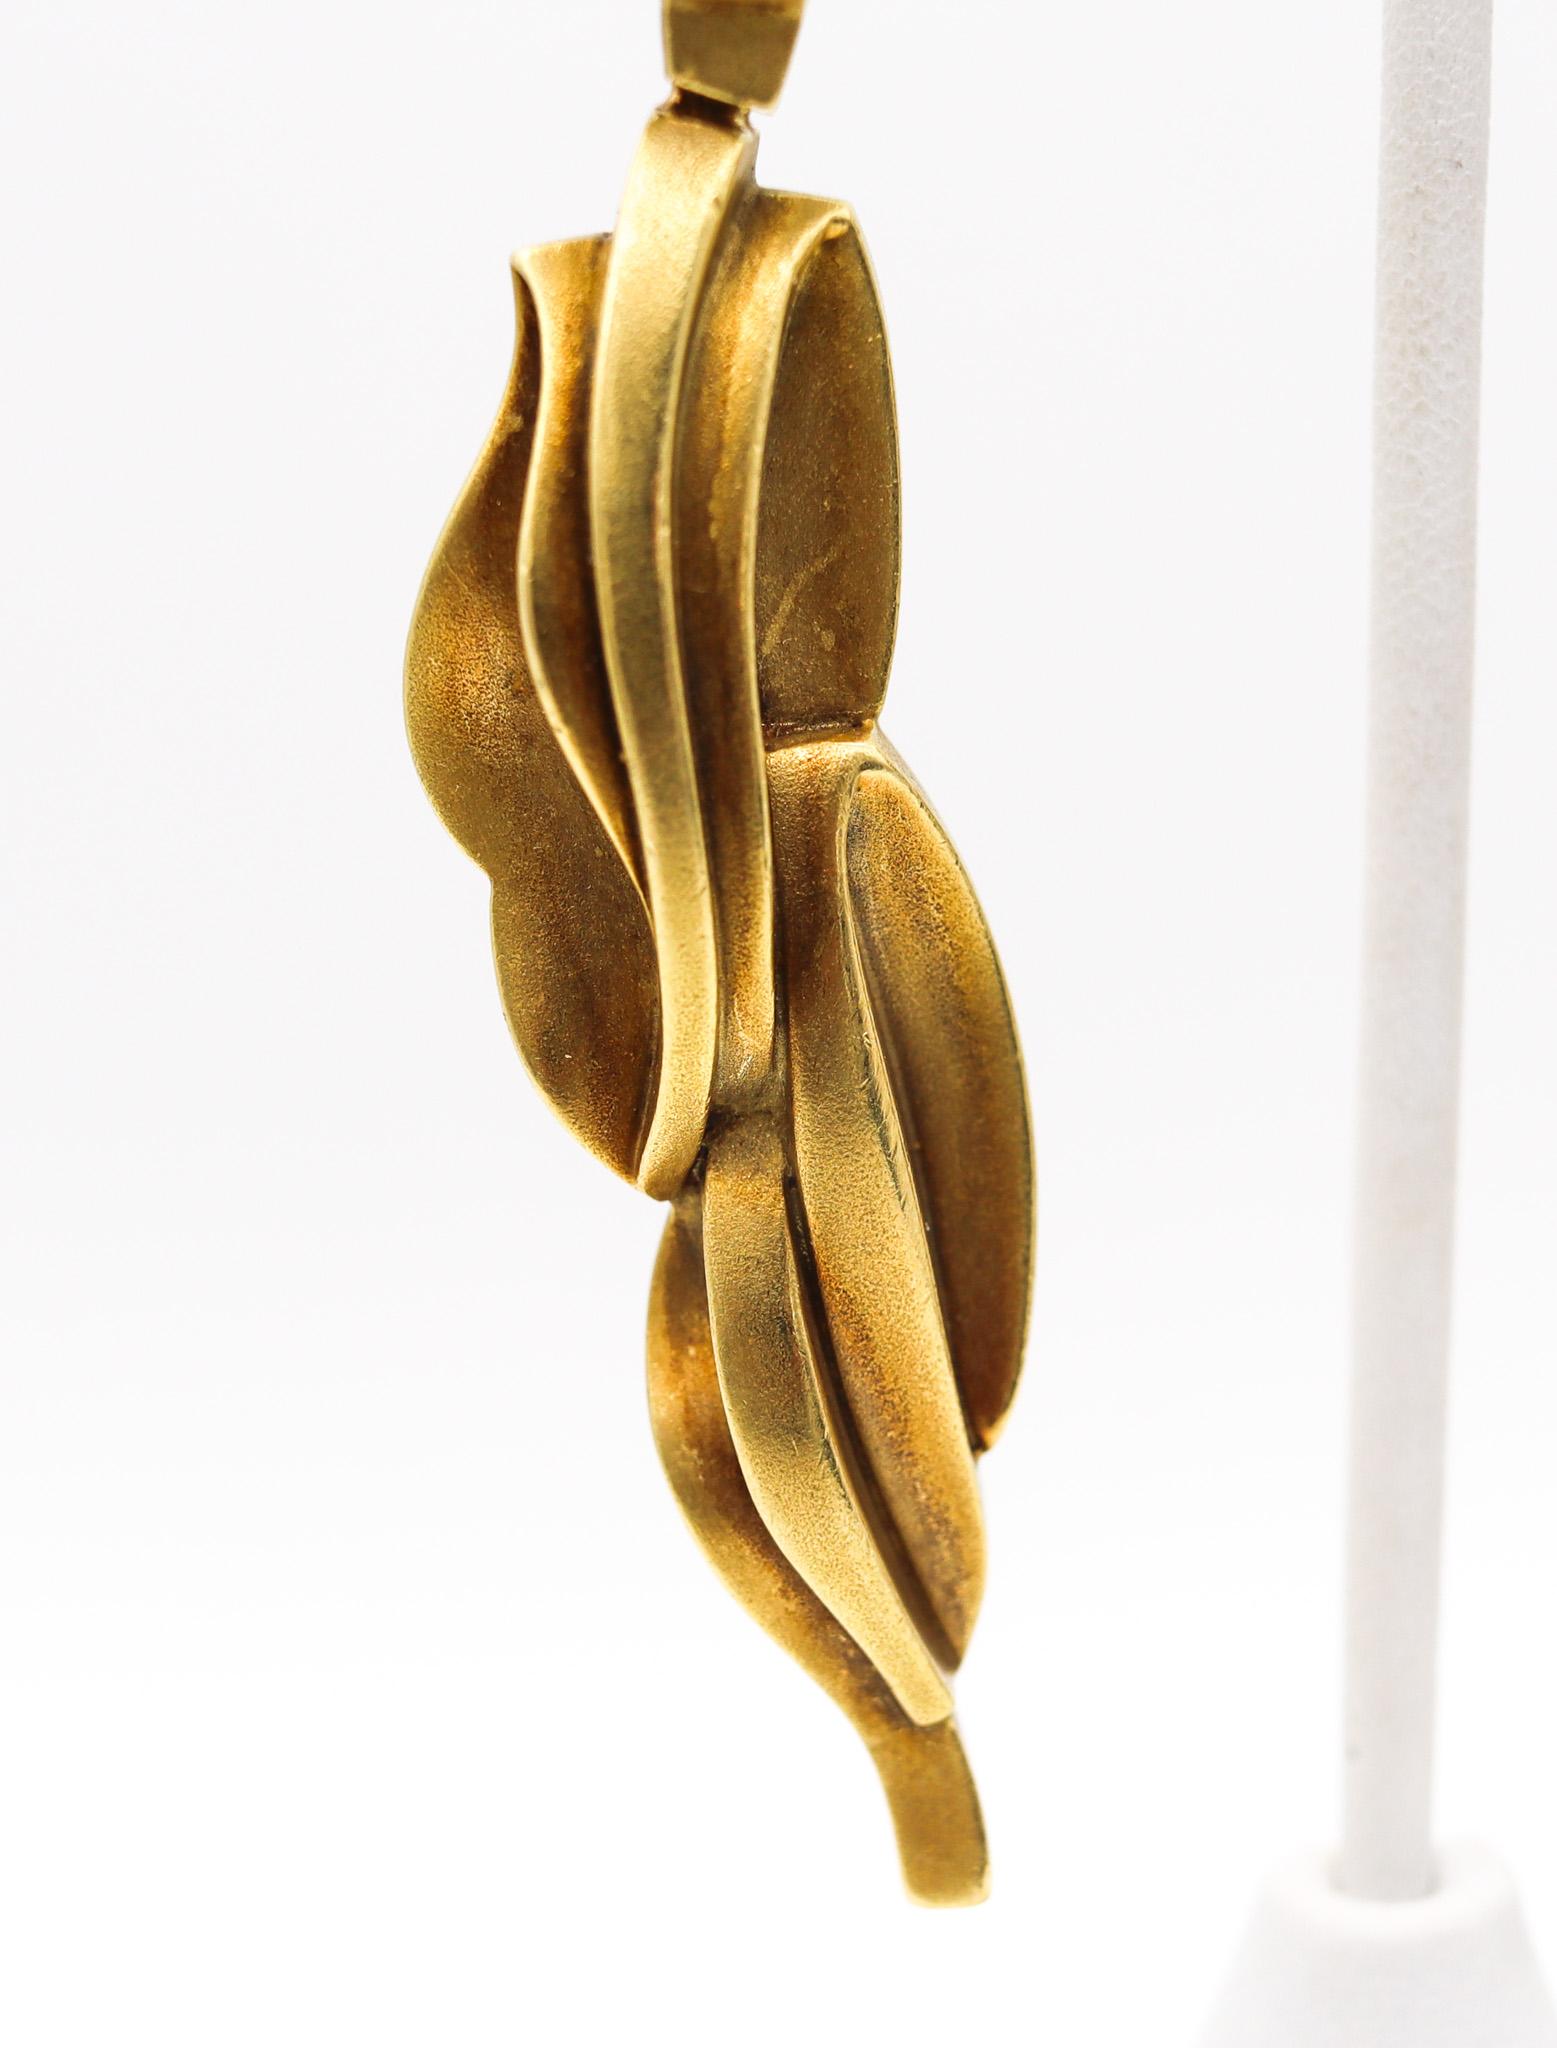 Dangle drops ear clips designed by Kieselstein Cord.

This pair of magnificent earrings is one of the most iconic ones created in the 80s by this jewelry designer. The sinuous shape of its sculptural forms will never go out of style and screams